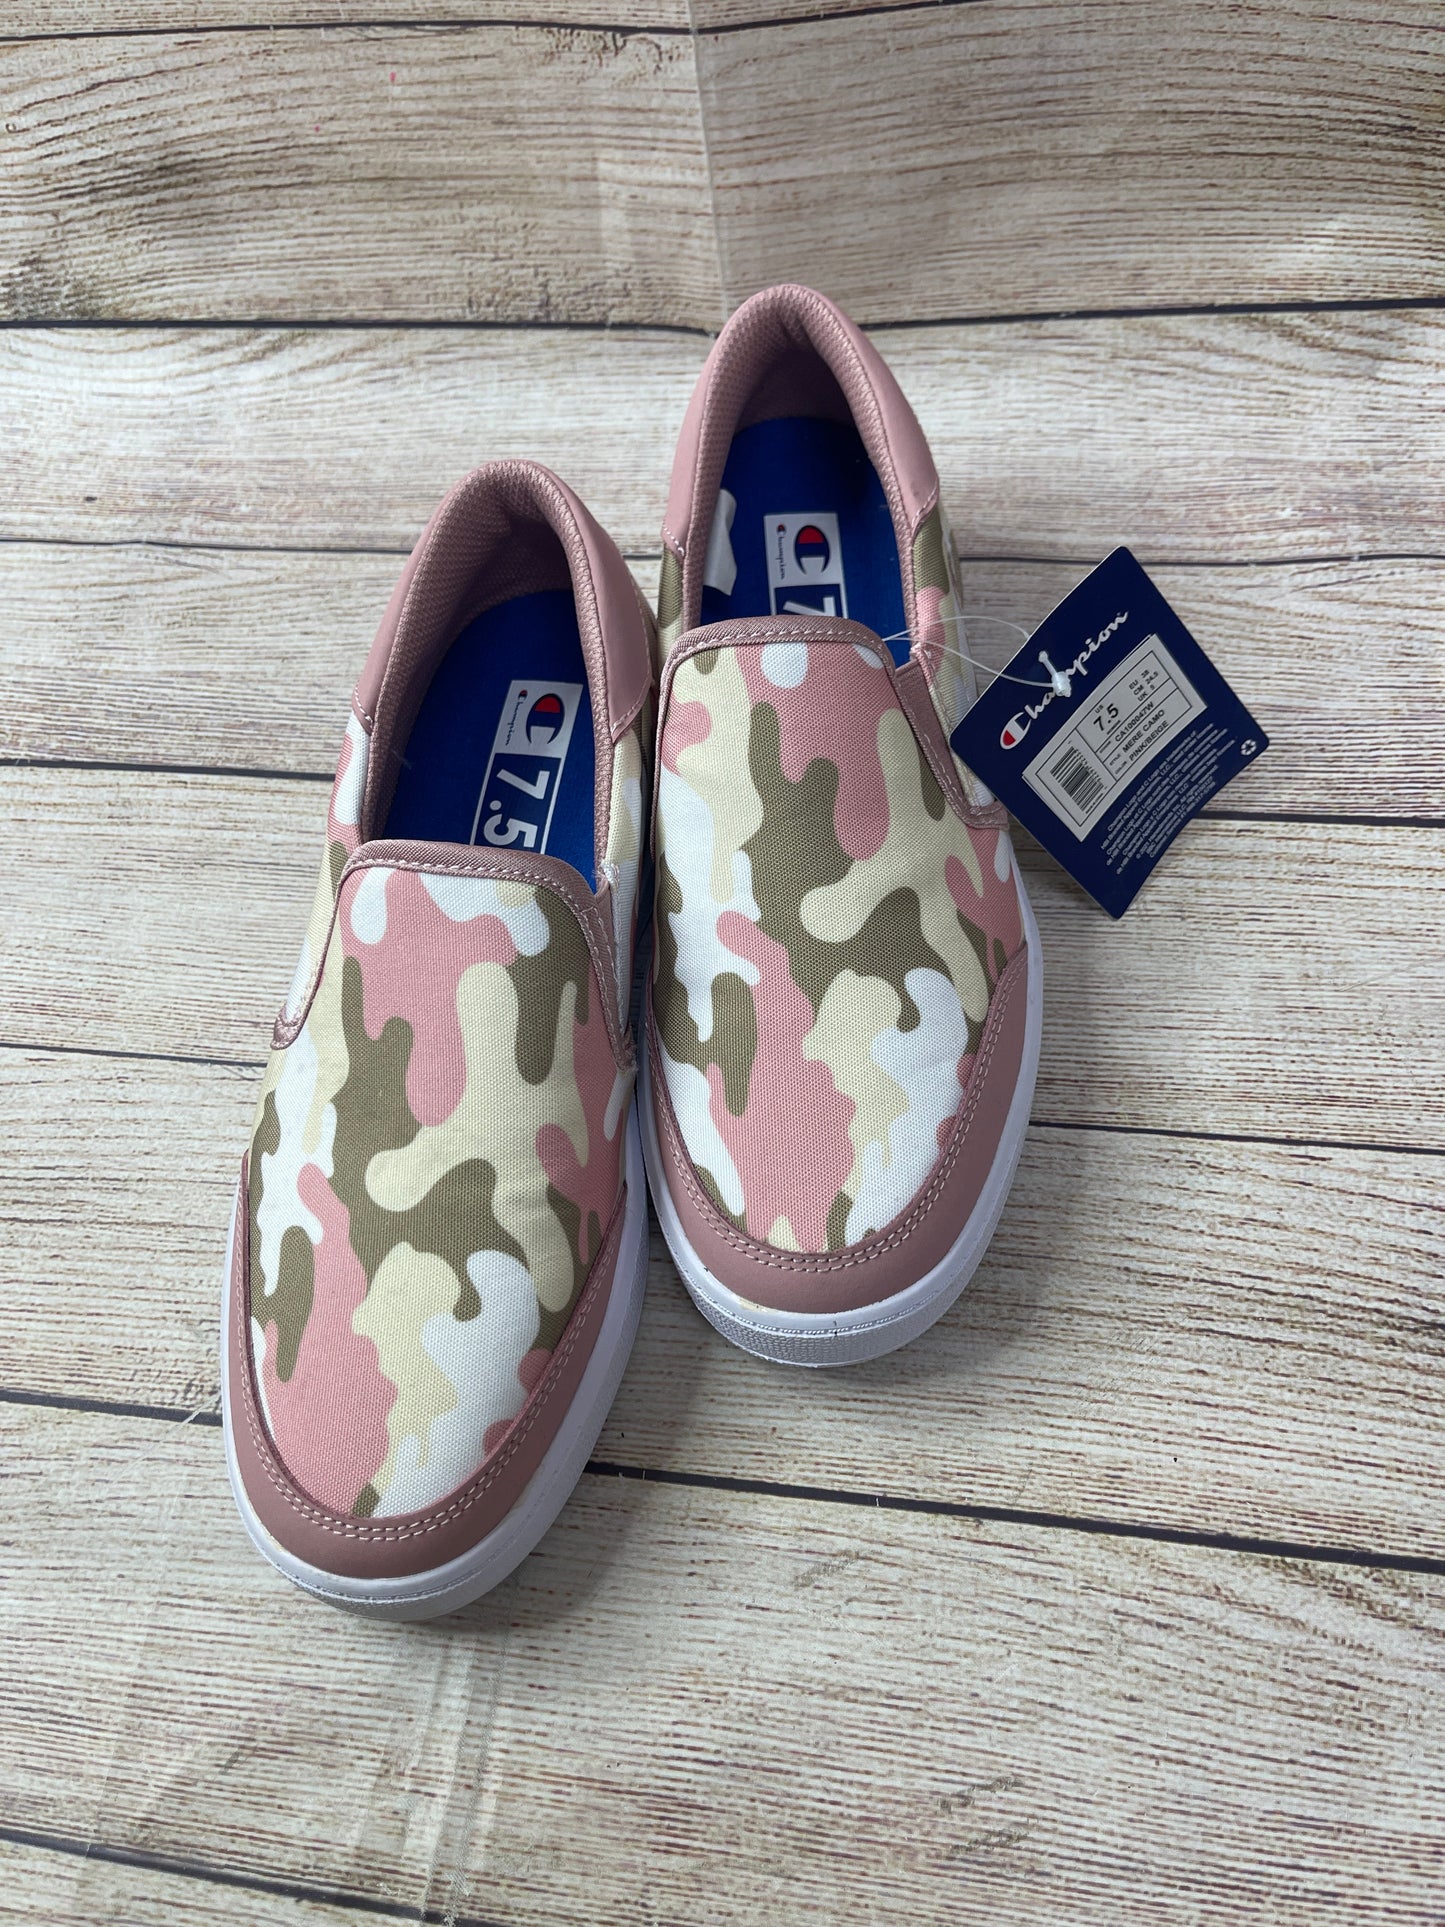 Camouflage Print Shoes Sneakers Champion, Size 7.5